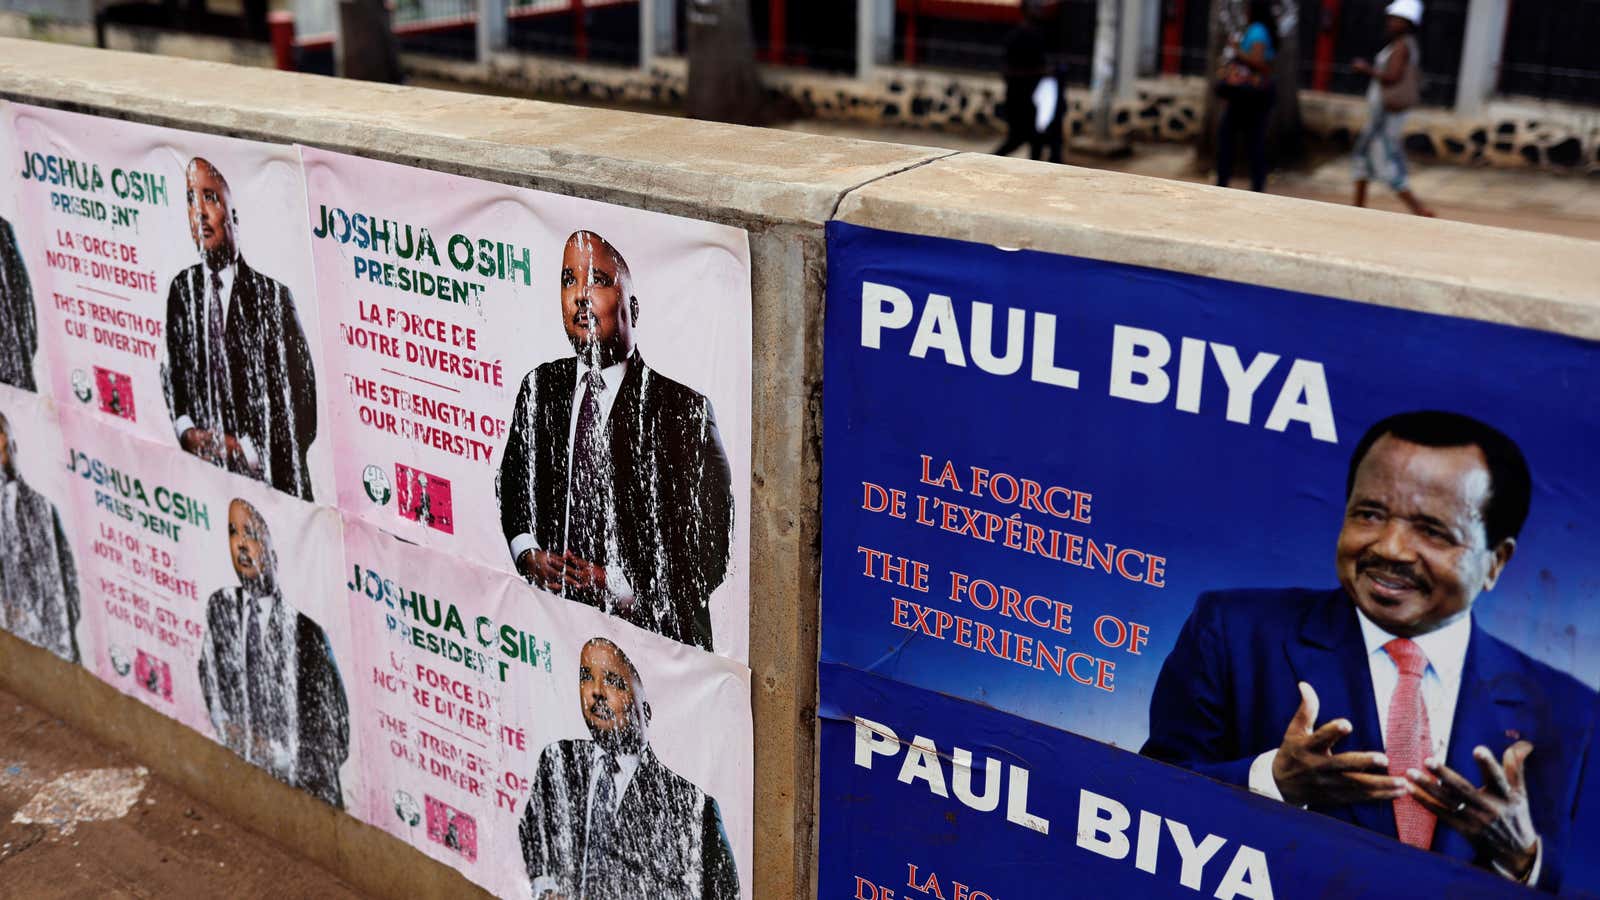 Electoral posters for Cameroon President Paul Biya and candidate Joshua Osih of Social Democratic Front party in Yaounde, Cameroon